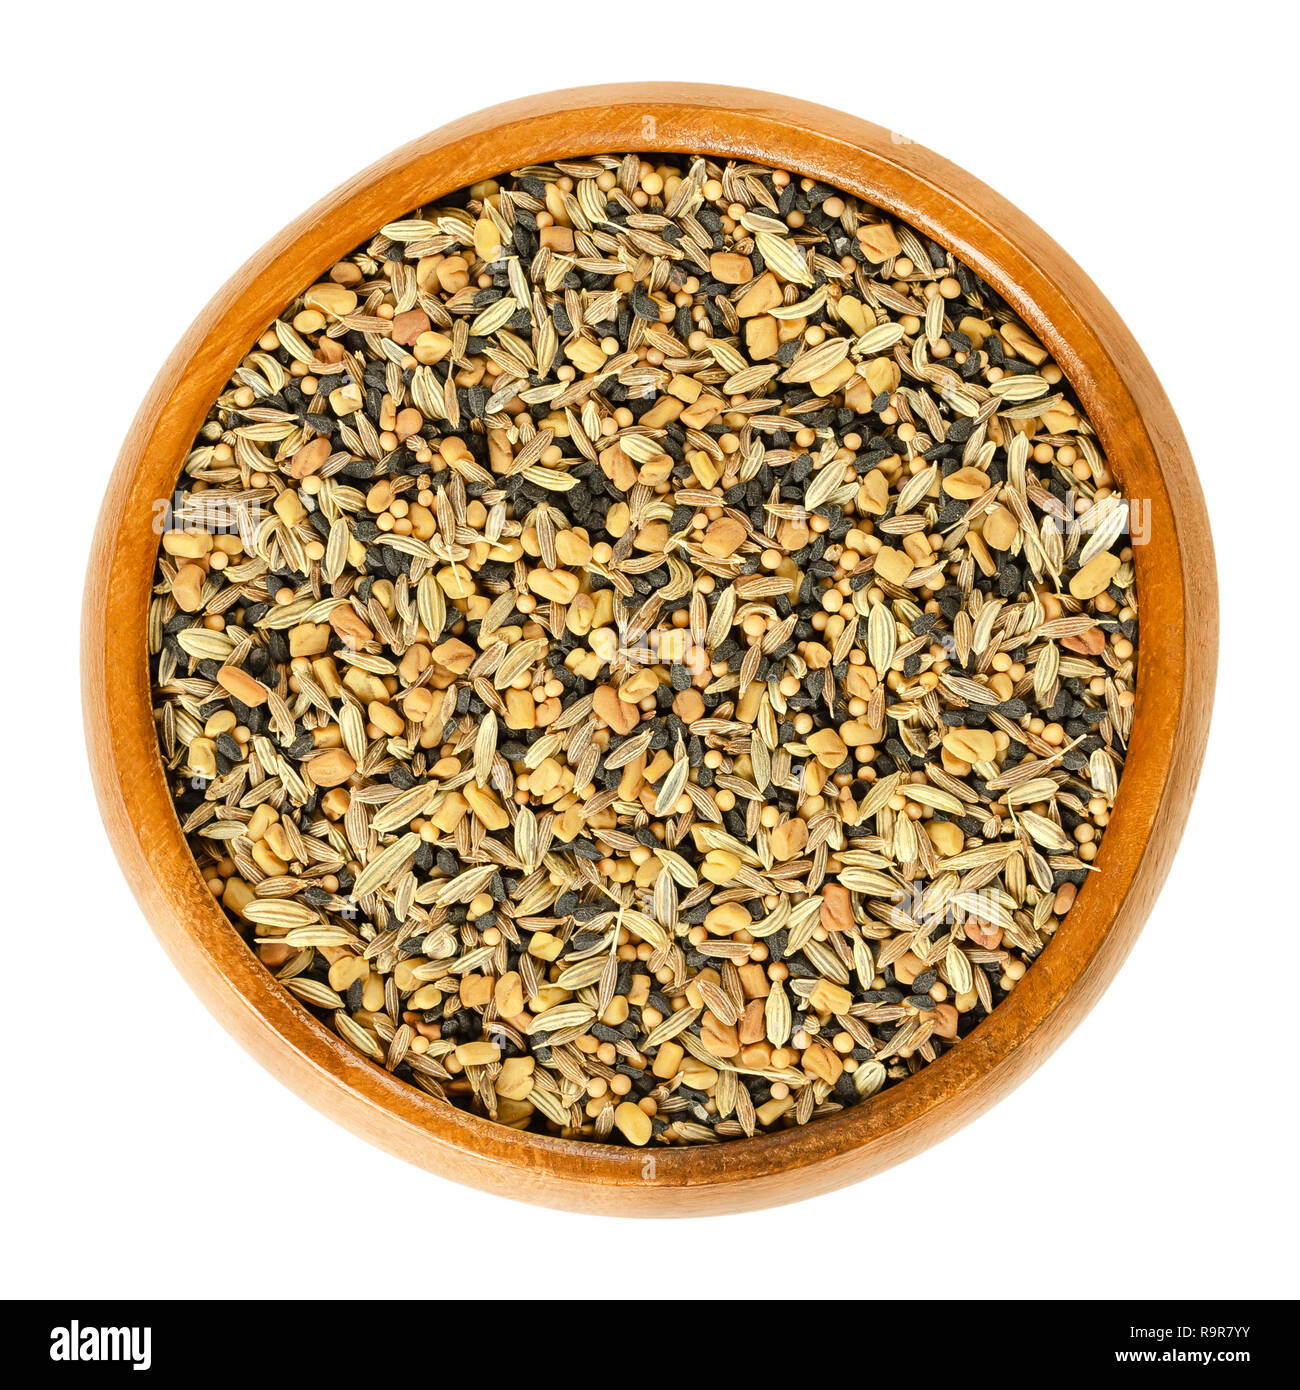 Panch phoron, whole spice blend in wooden bowl. Mix of five spices. Fenugreek, nigella, cumin, mustard and fennel seeds. Isolated macro food photo. Stock Photo